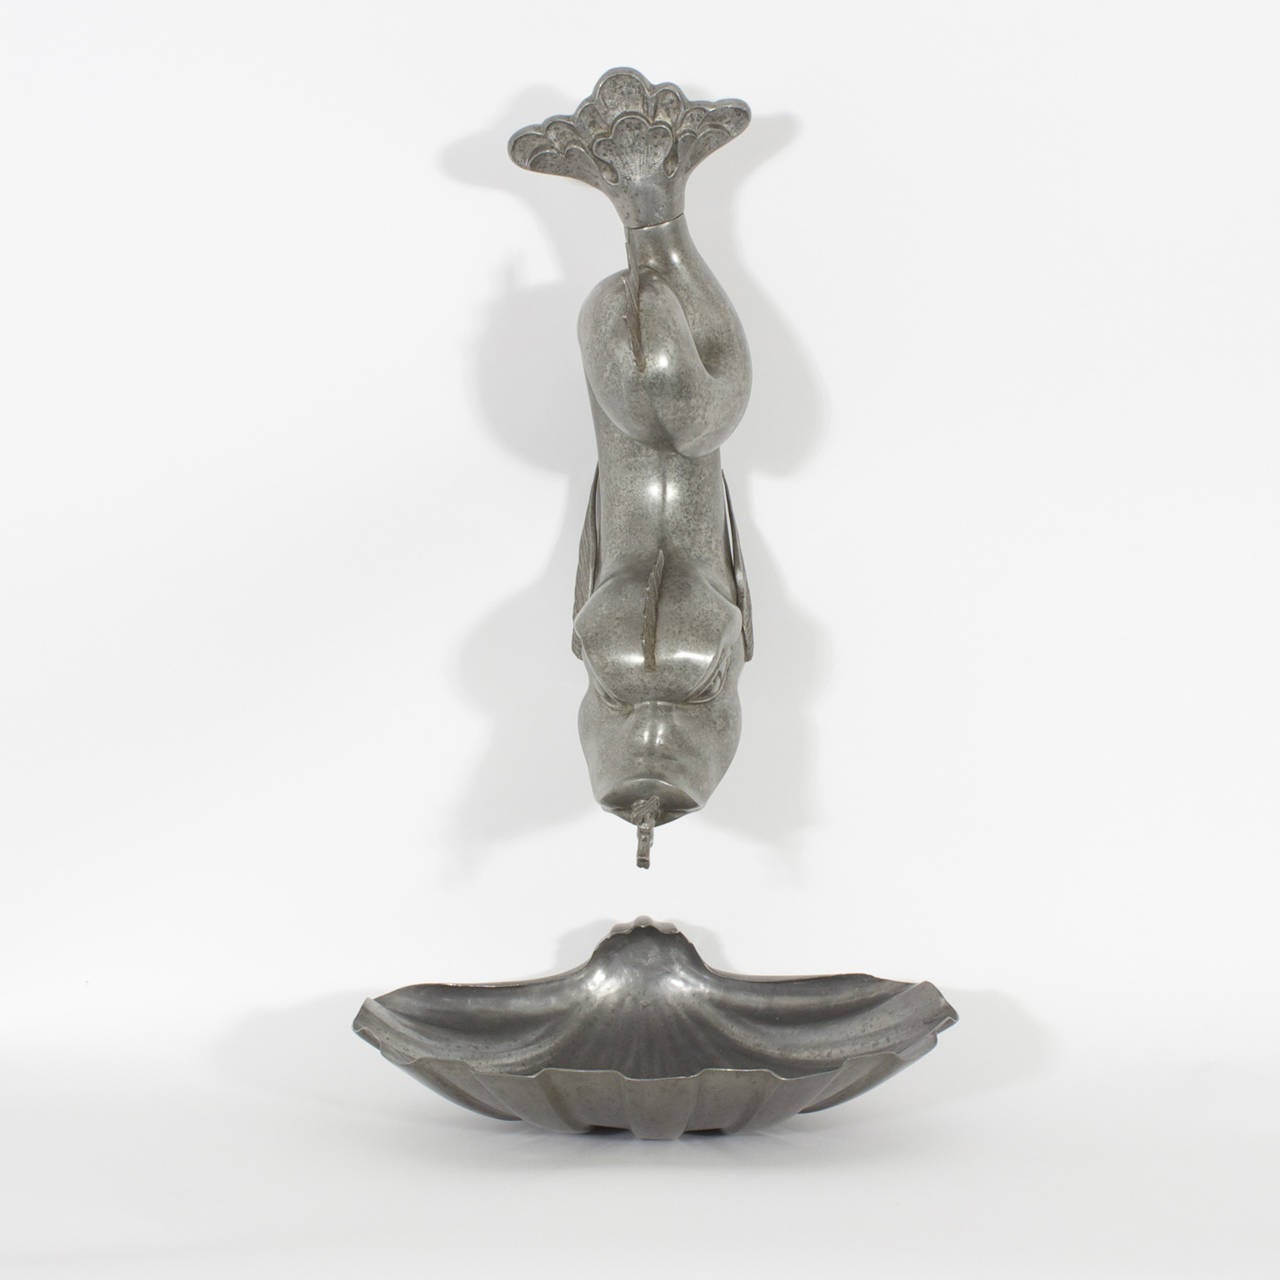 Highly decorative and fanciful dolphin fountain, pewter lavabo, depicting the sailors mythological dolphin form with a spout in its mouth, hung over a shell shaped bowl, all with an aged and polished finish.